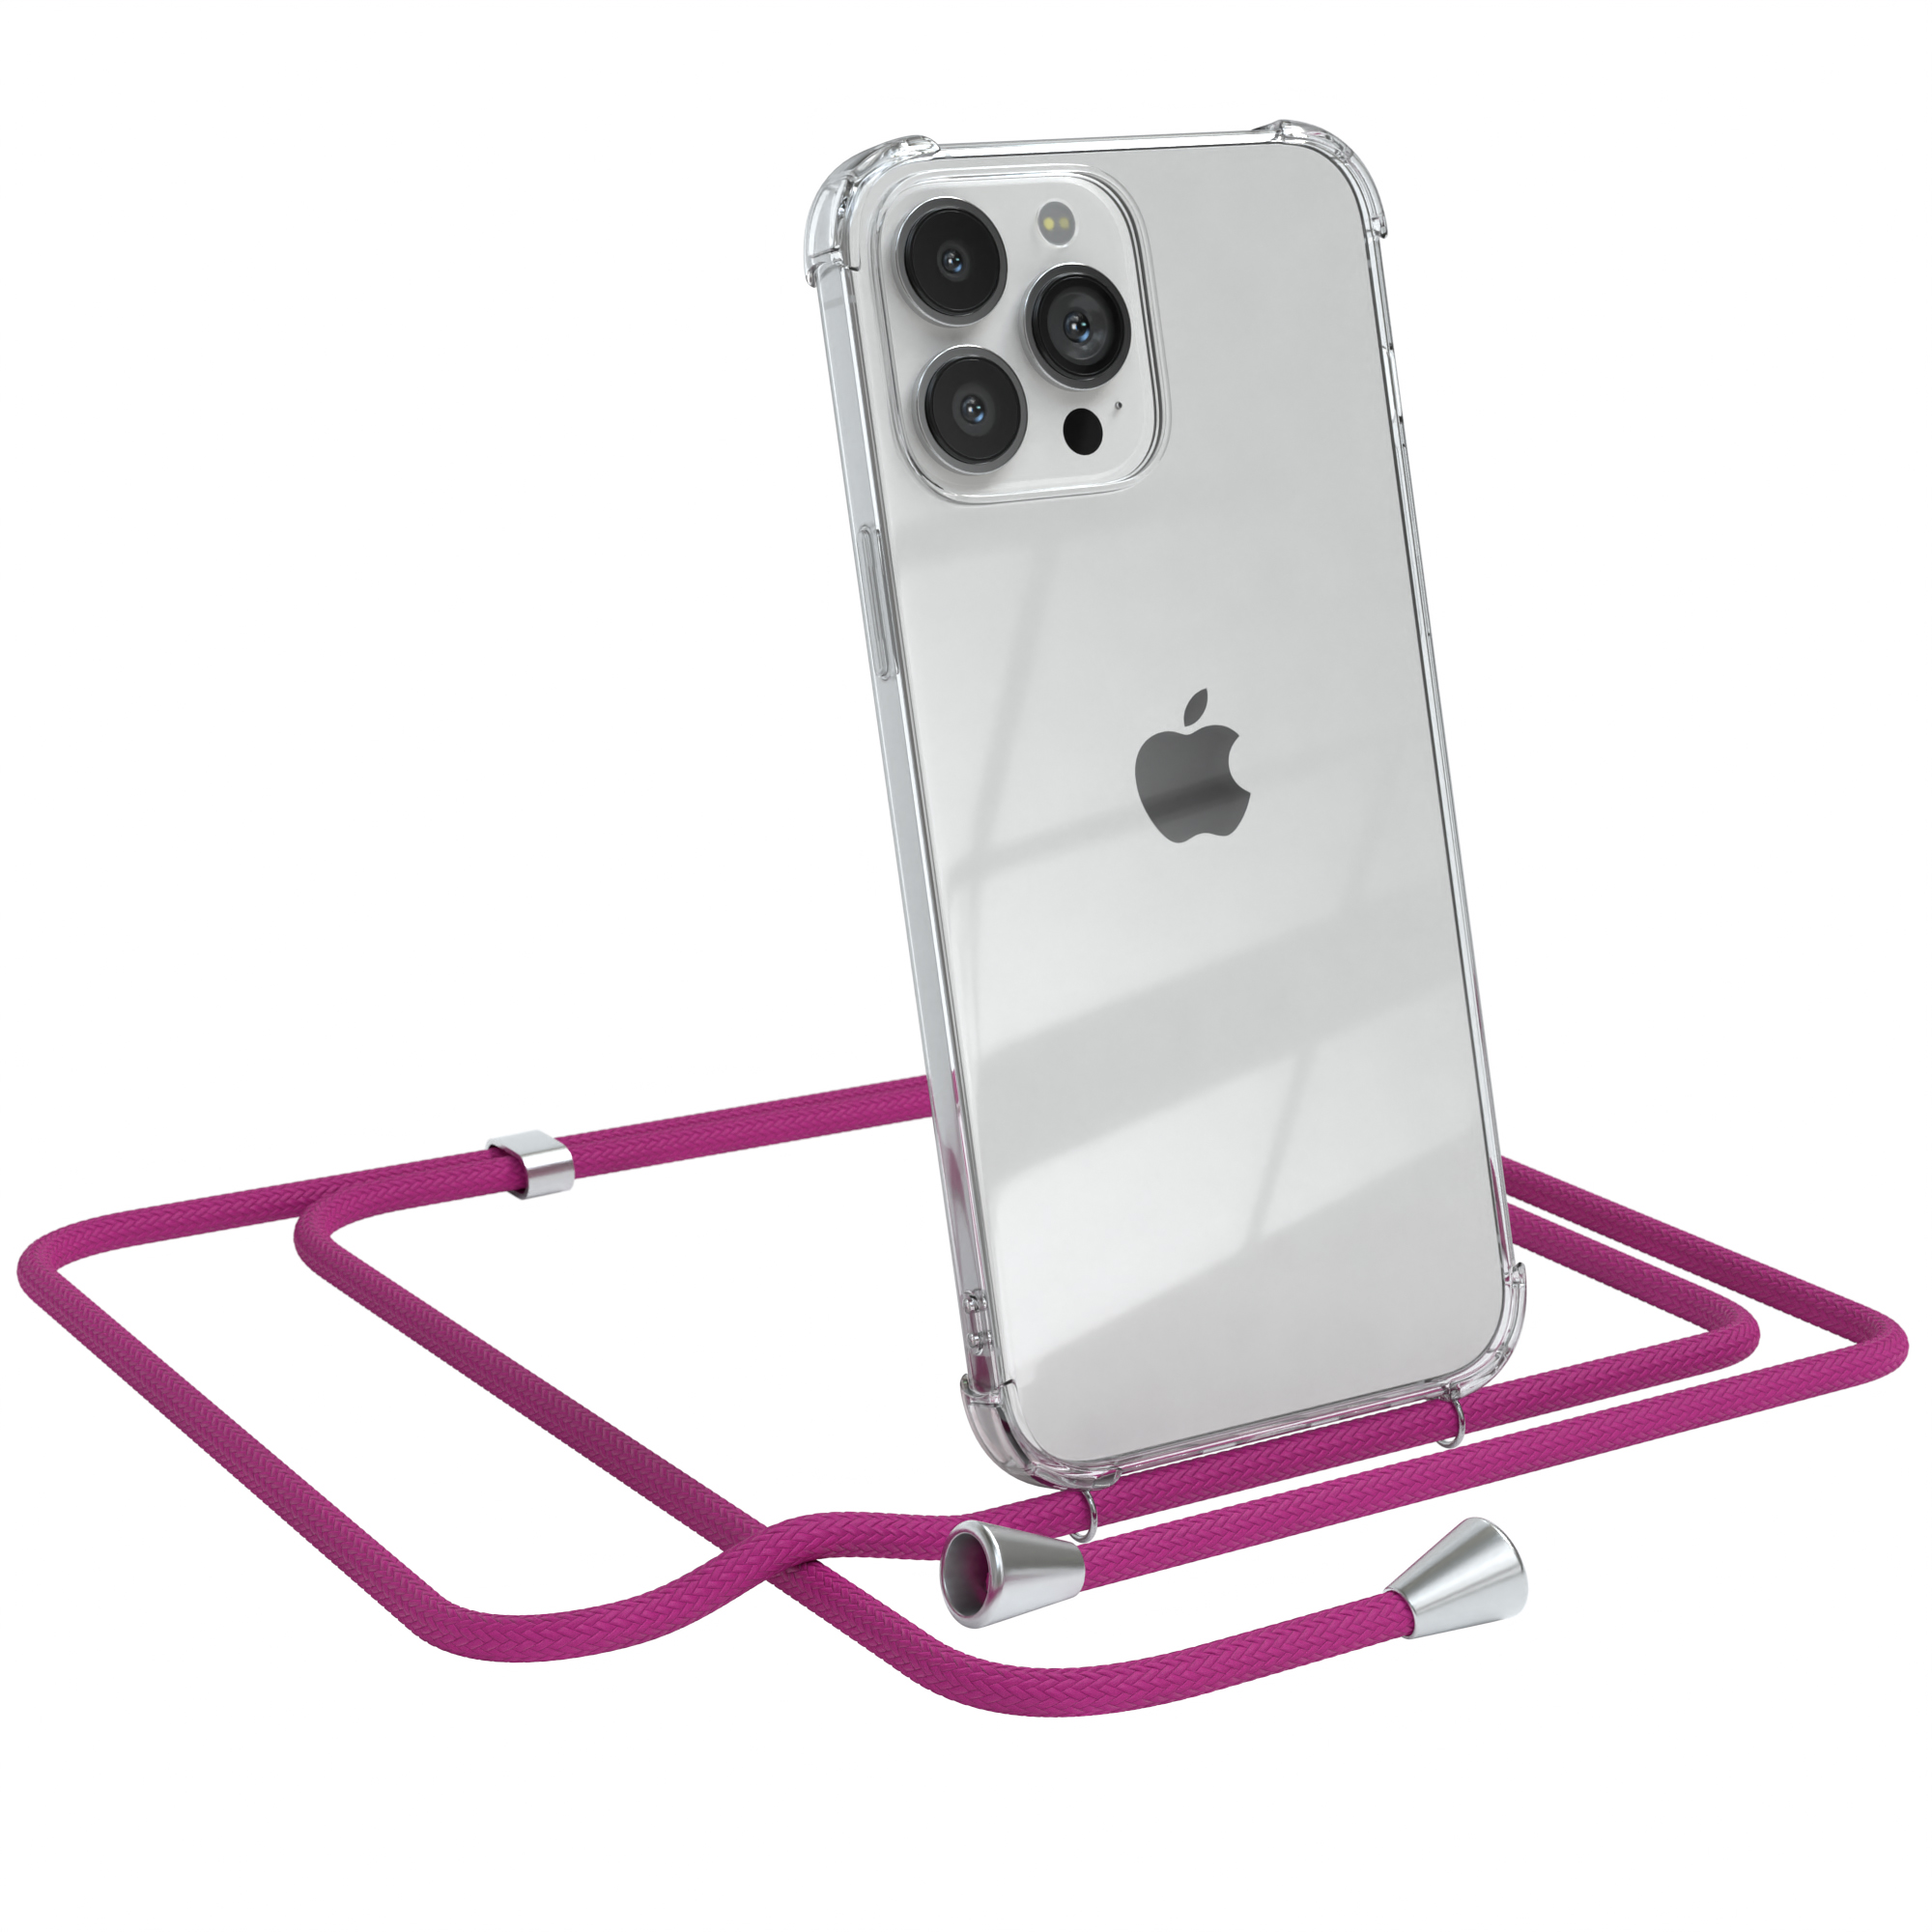 Clear iPhone Max, Clips Silber Umhängetasche, EAZY 13 CASE Pink Pro Cover mit Apple, / Umhängeband,